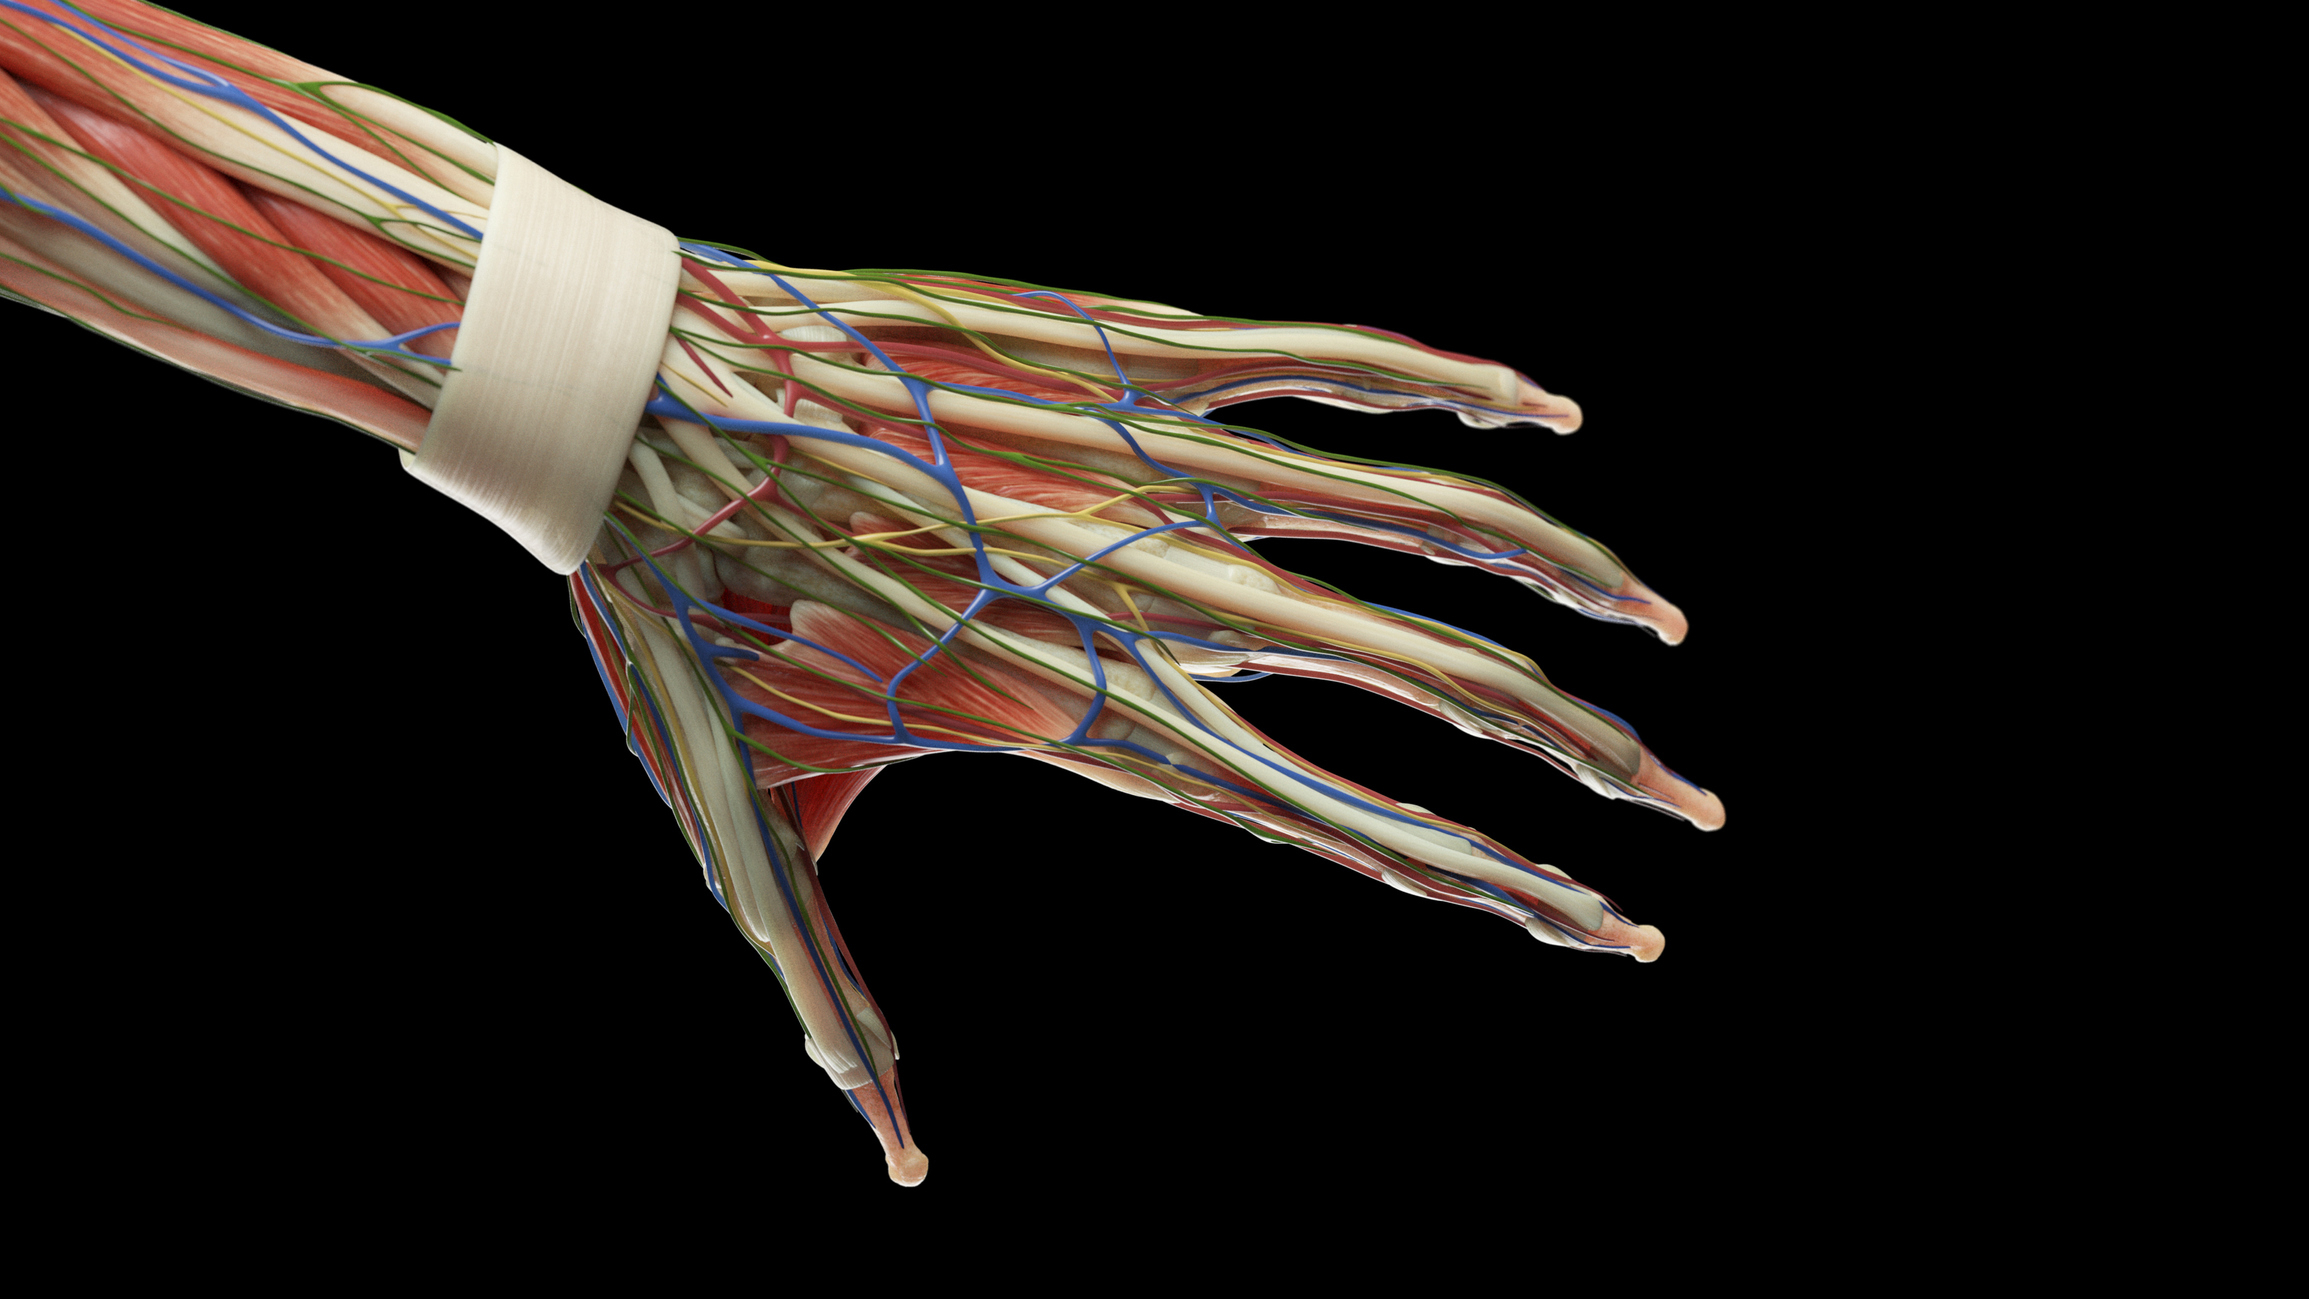 An anatomical model showing the intricate network of muscles, tendons, and nerves in a human hand